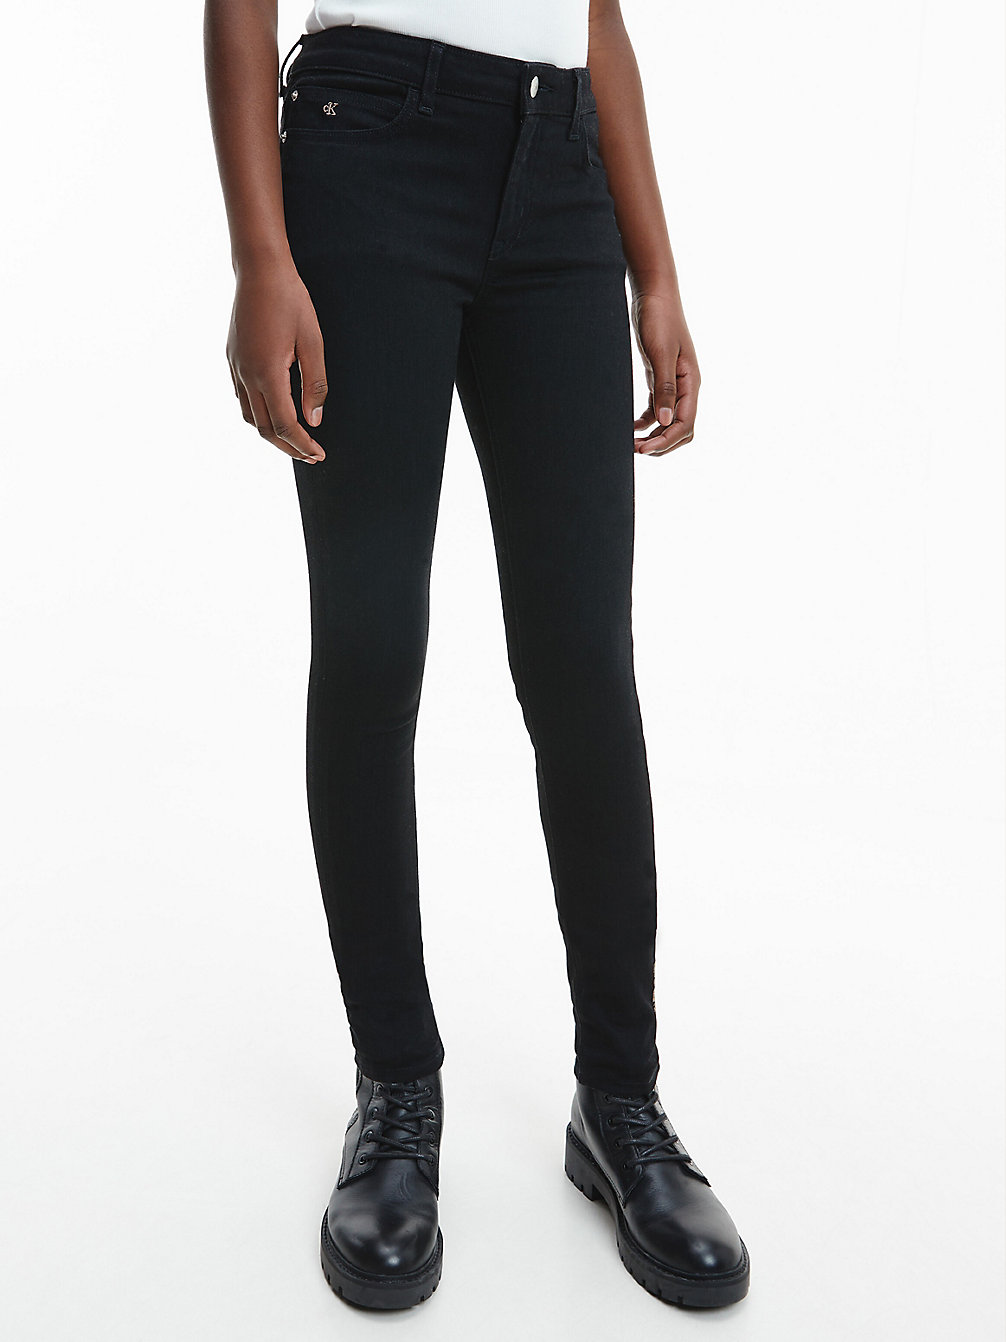 Mid Rise Skinny Jeans > CLEAN BLACK STRETCH > undefined girls > Calvin Klein